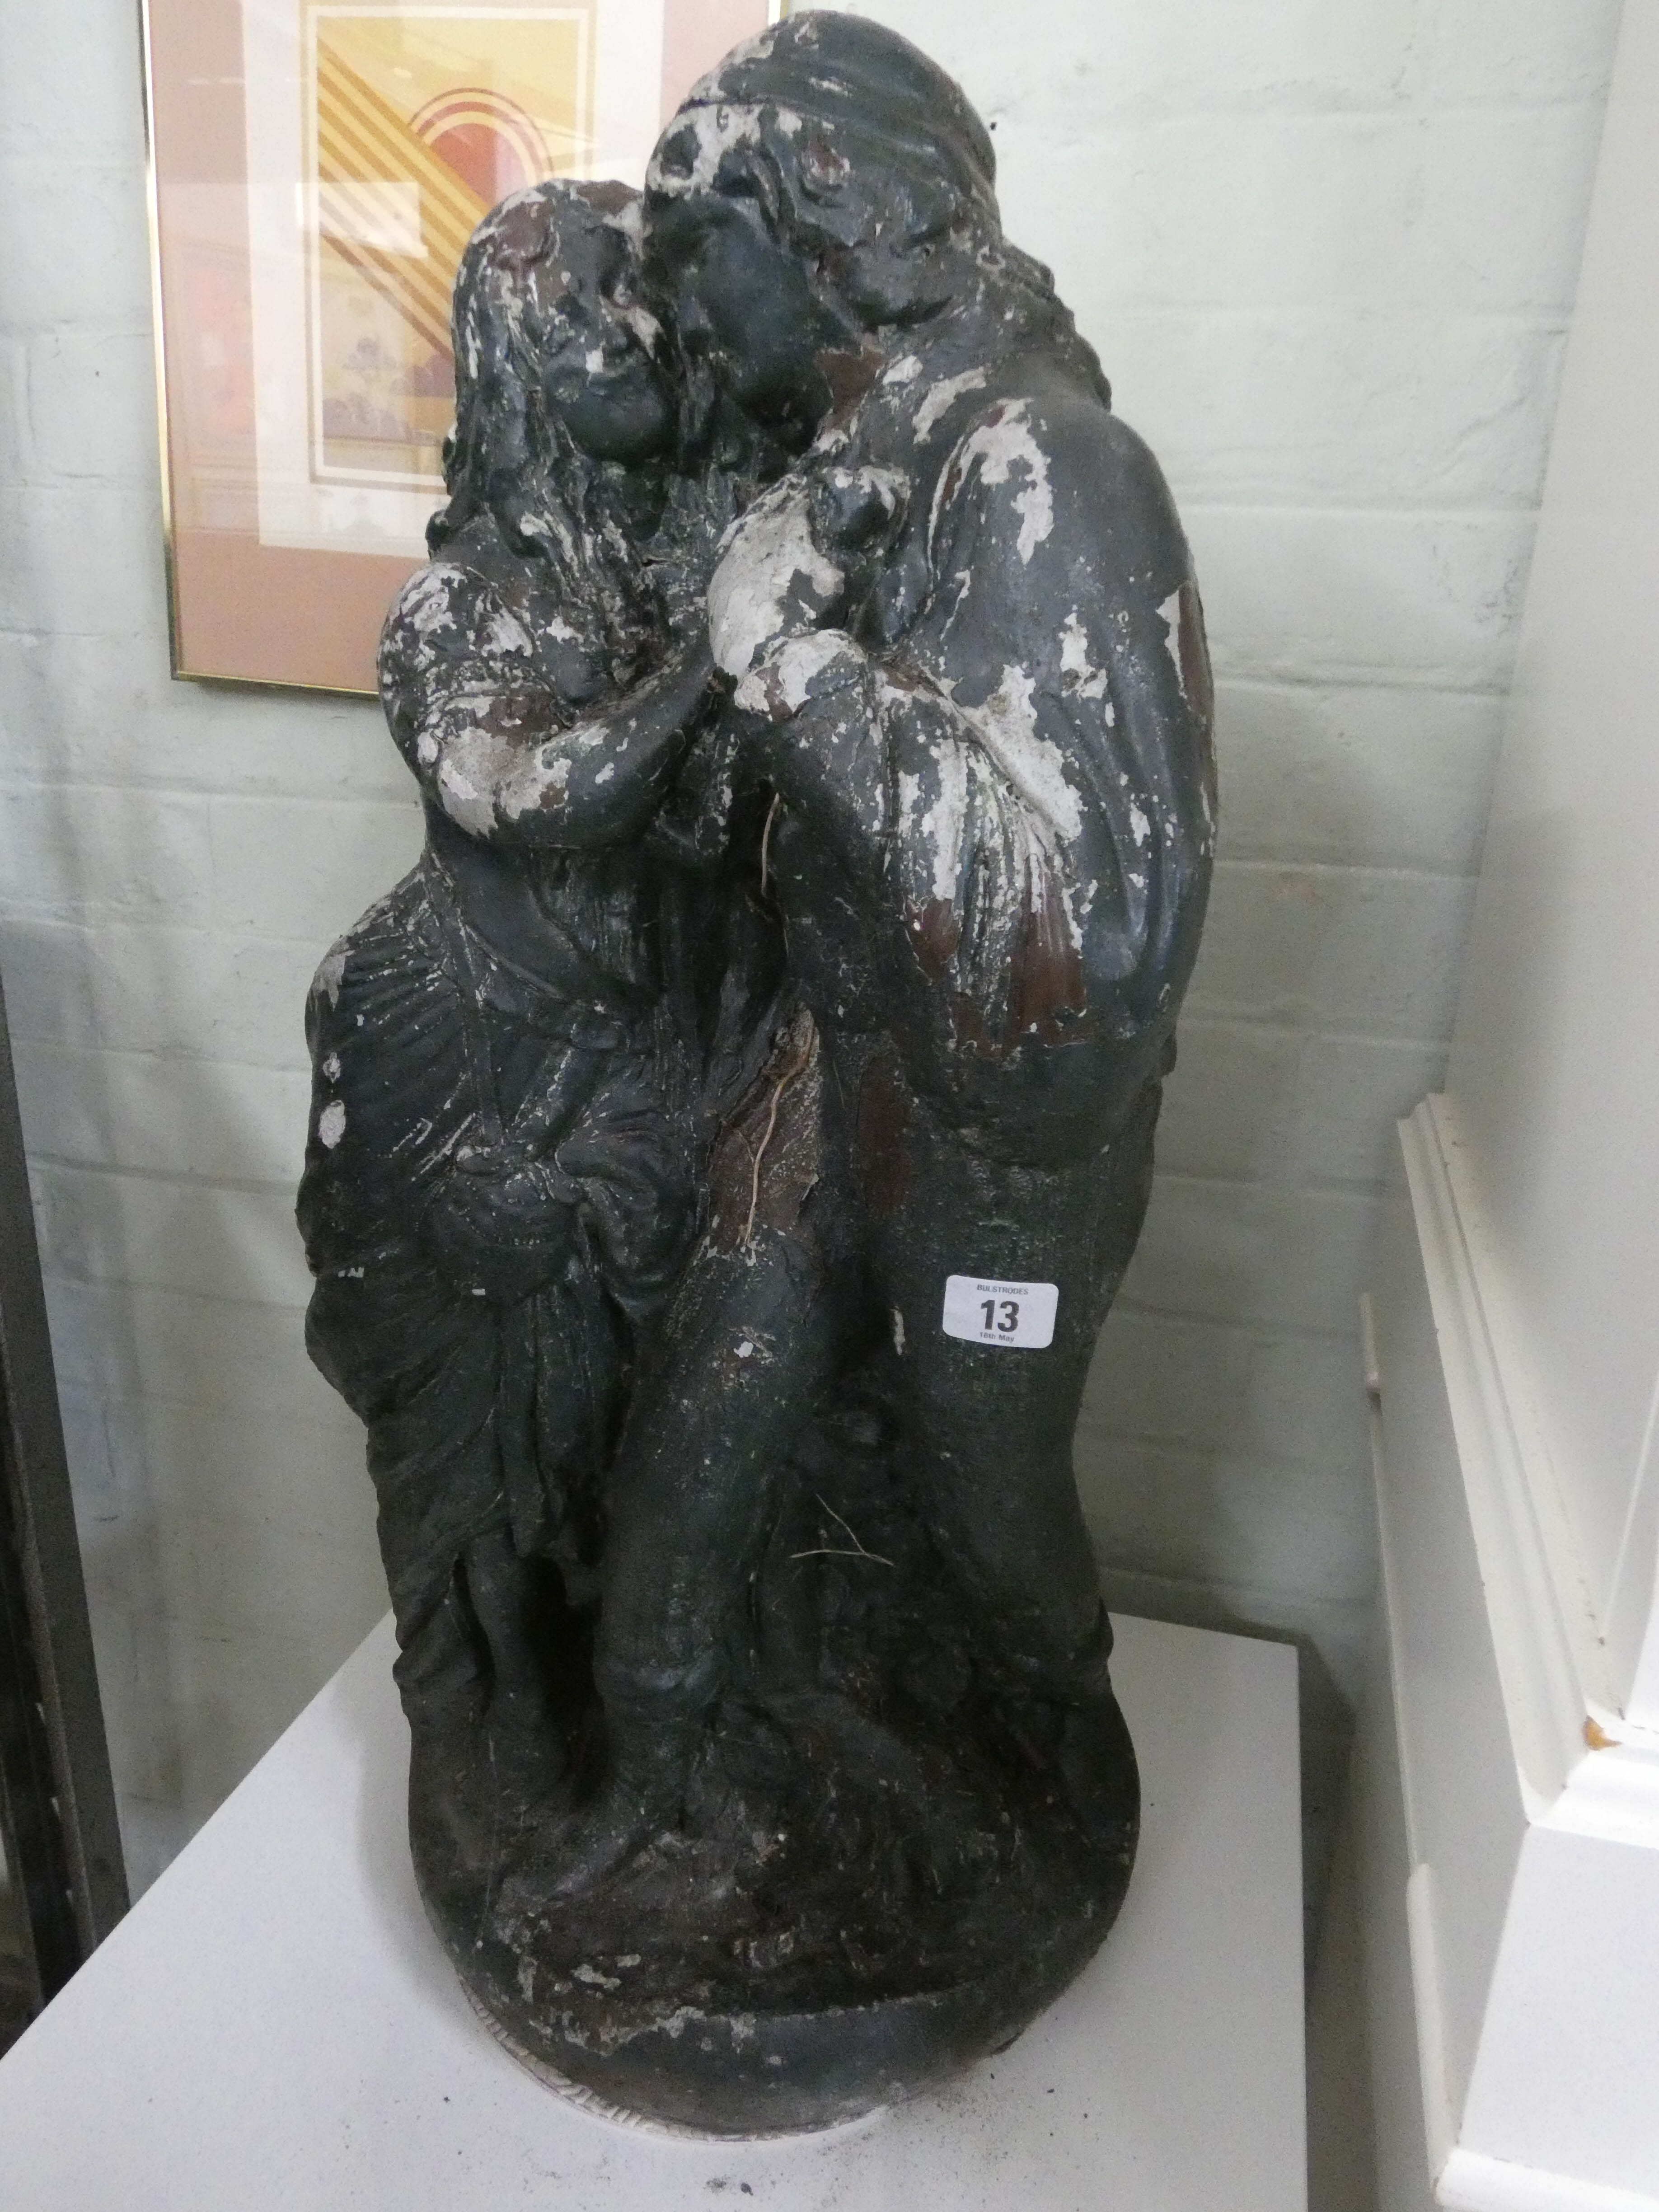 A reconstituted stone garden ornament of a couple, has been painted,